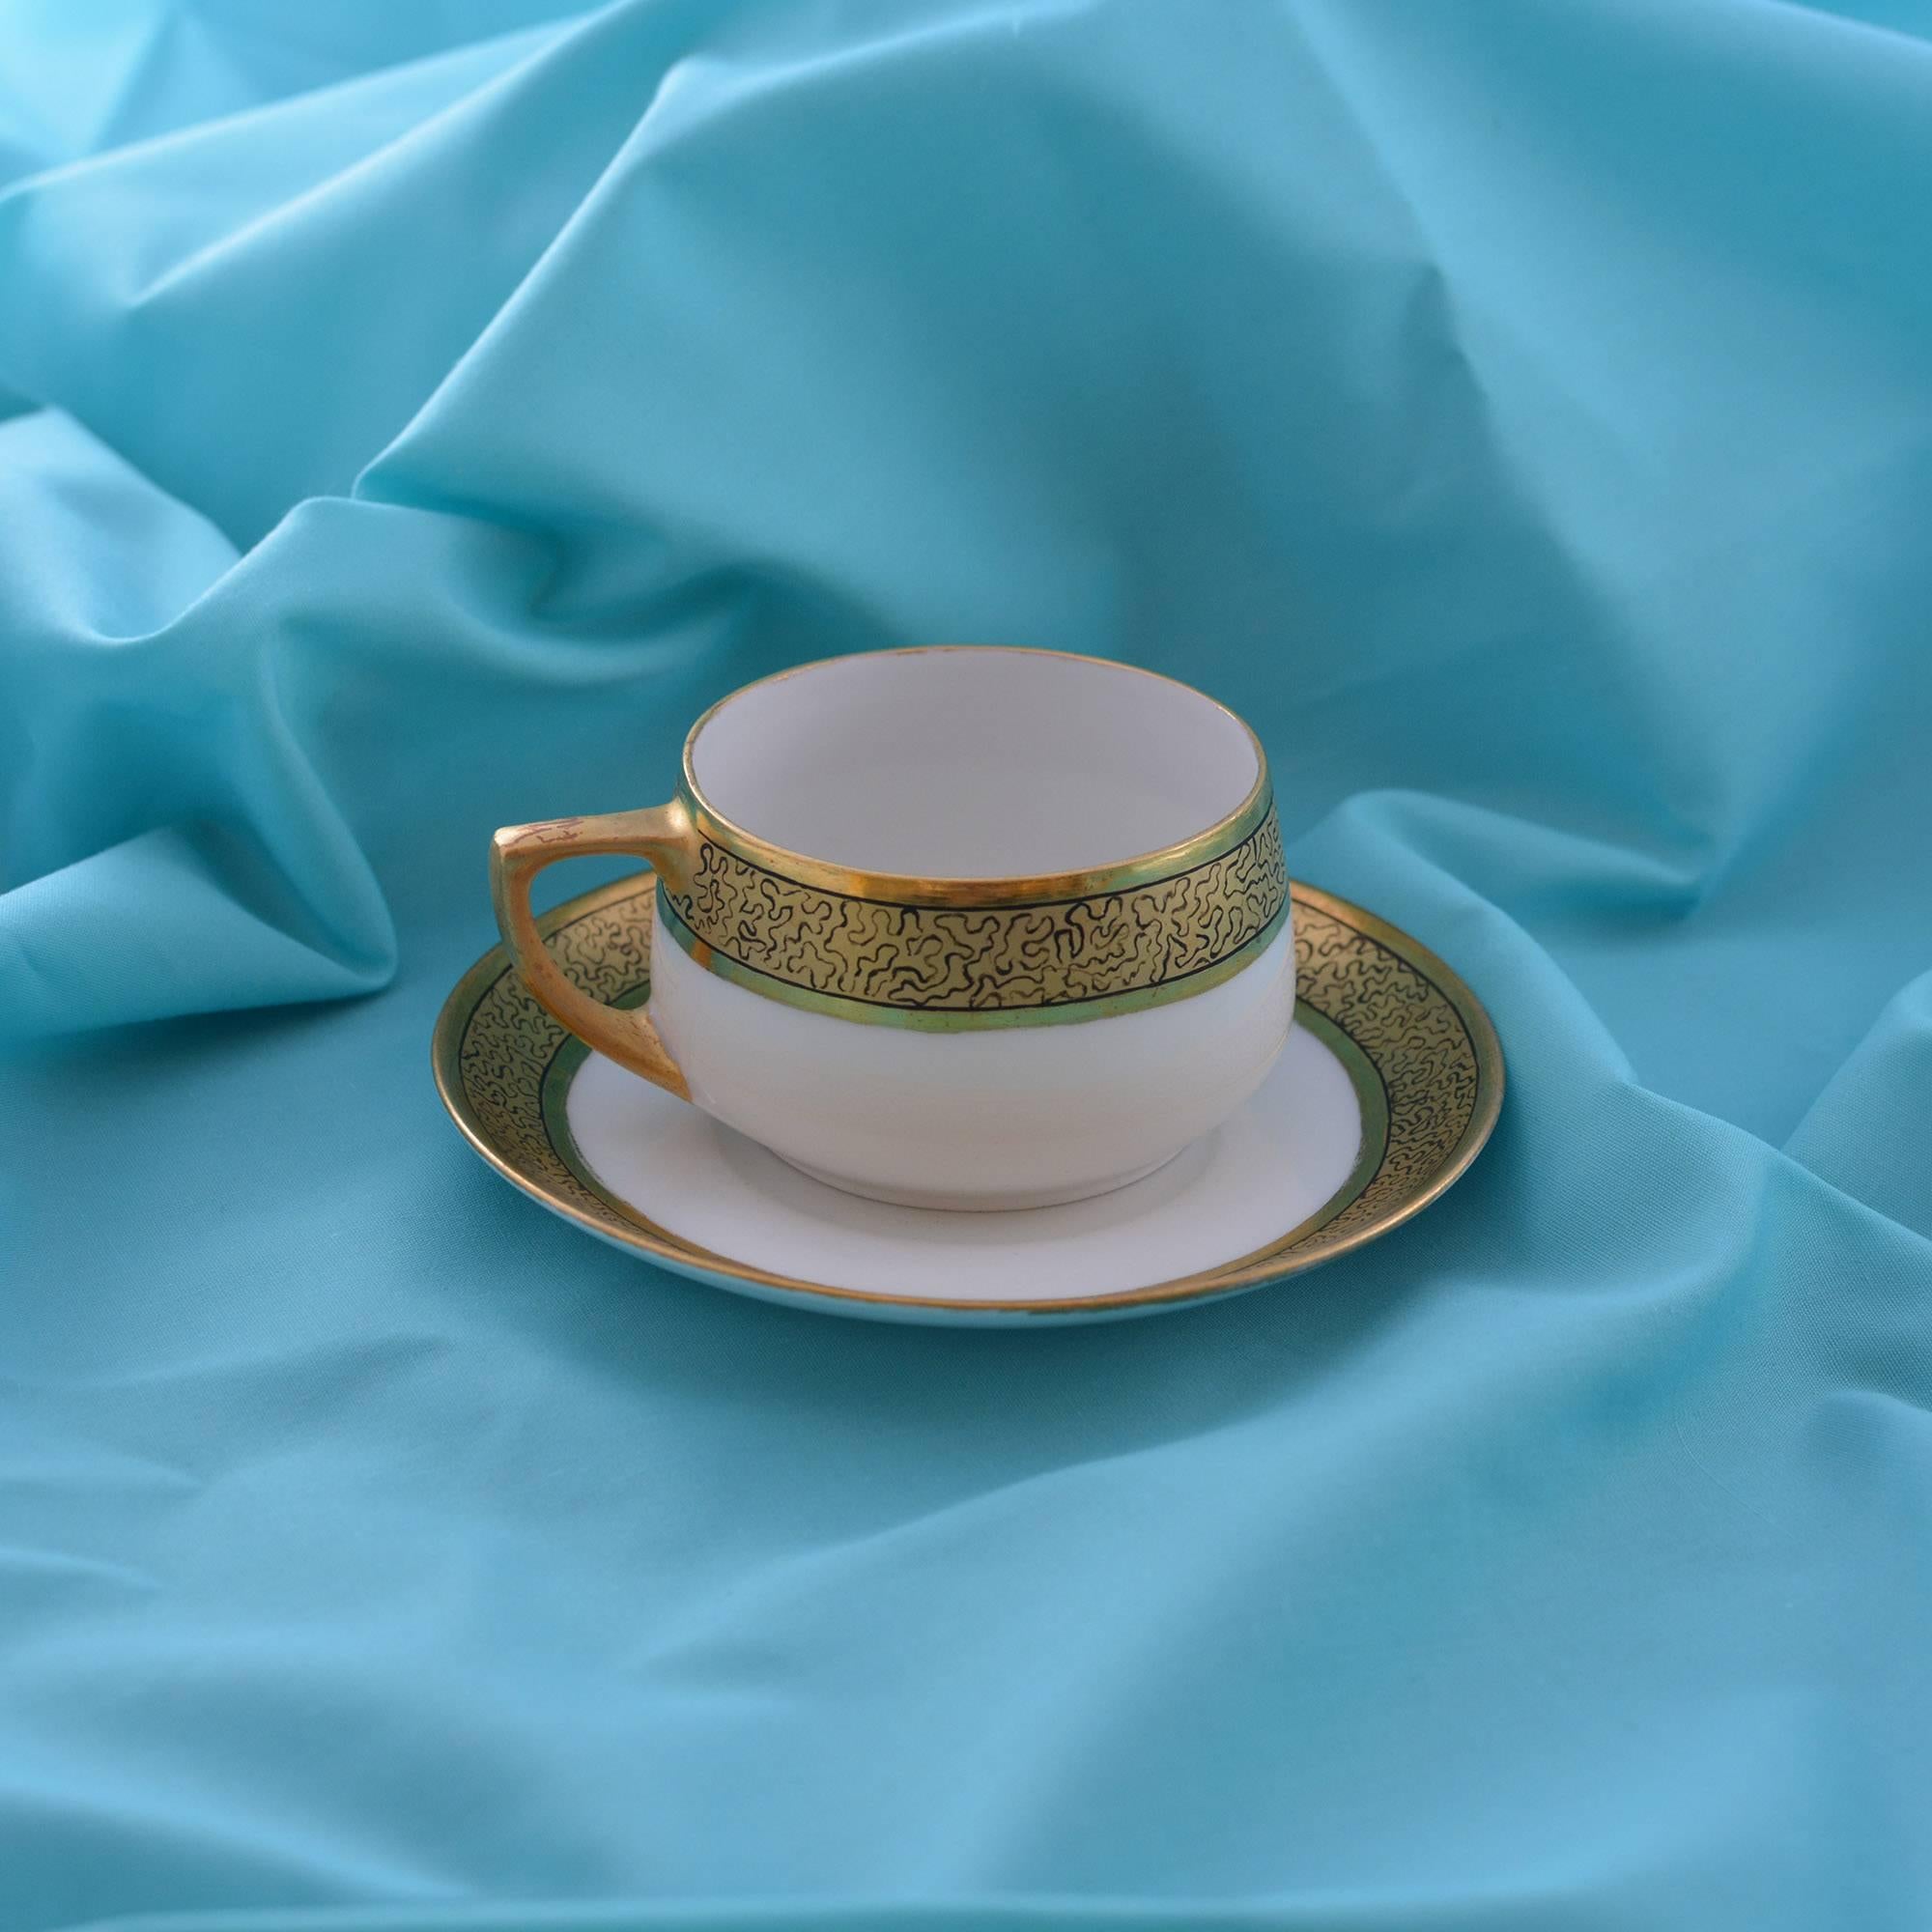 This fine porcelain Art Nouveau style cups with saucers have a wide gilded band to the rims with a delicate black line design within and the saucers have gilded trim. The group is comprised of eight saucers, a creamer and eight cups. They bear a